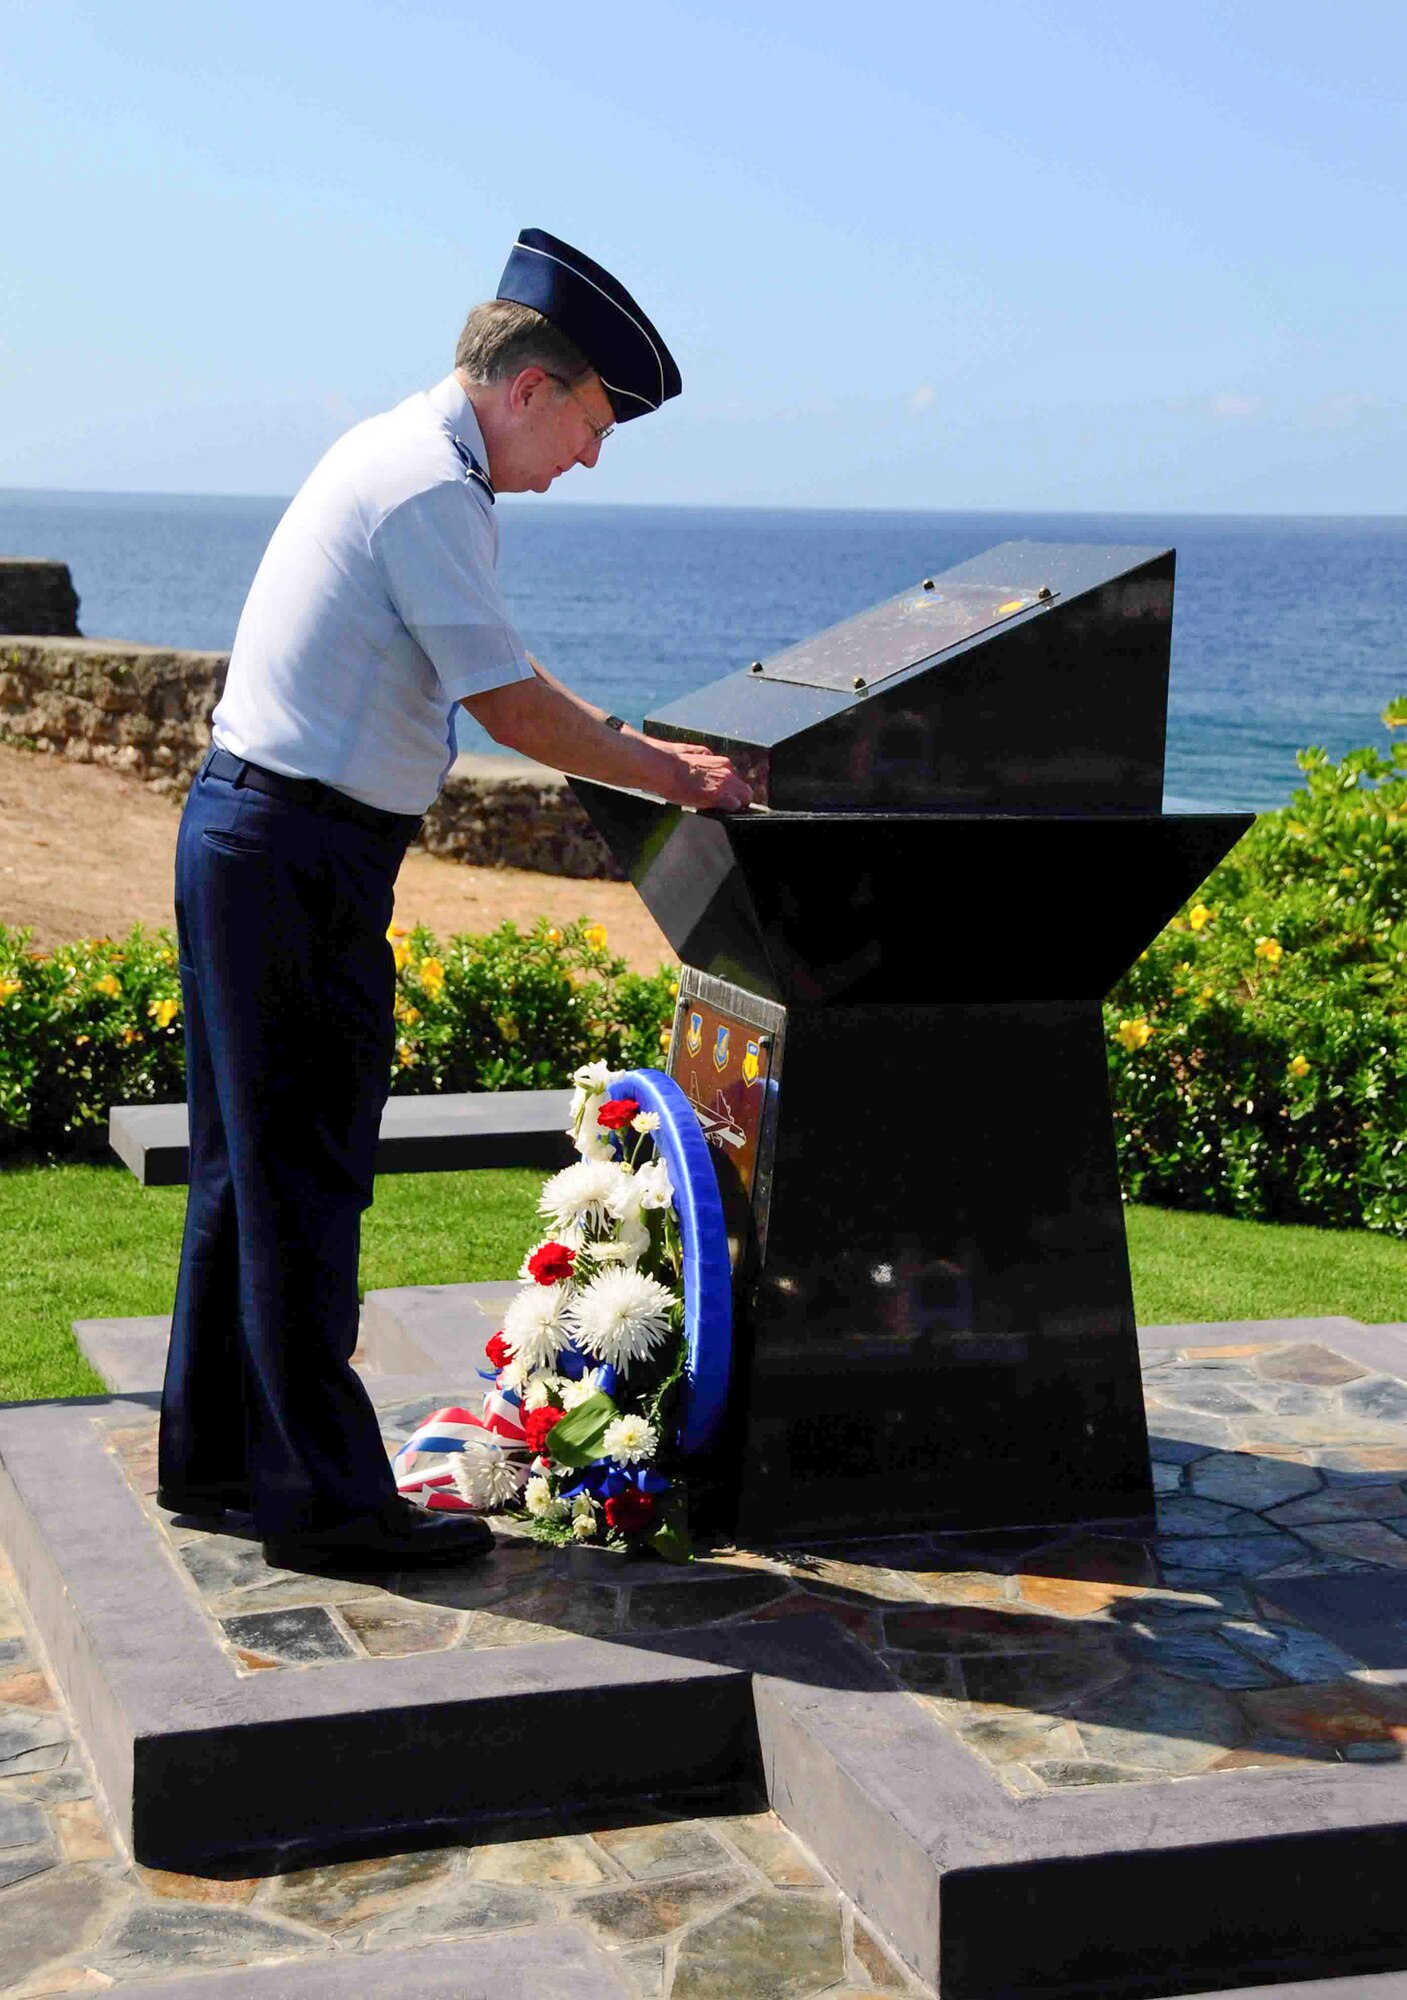 Lt. Gen. Frank G. Klotz places his "commander's coin" on the memorial to RAIDR 21 May 14, 2010, in Agana, Guam, after laying a wreath at the site commemorating the B-52 crew that was lost when their B-52 went down in the Pacific on Guam's Liberation Day on July 21, 2008. General Klotz is the commander of Air Force Global Strike Command. (U.S. Air Force photo/Airman 1st Class Jeffrey Schultze)